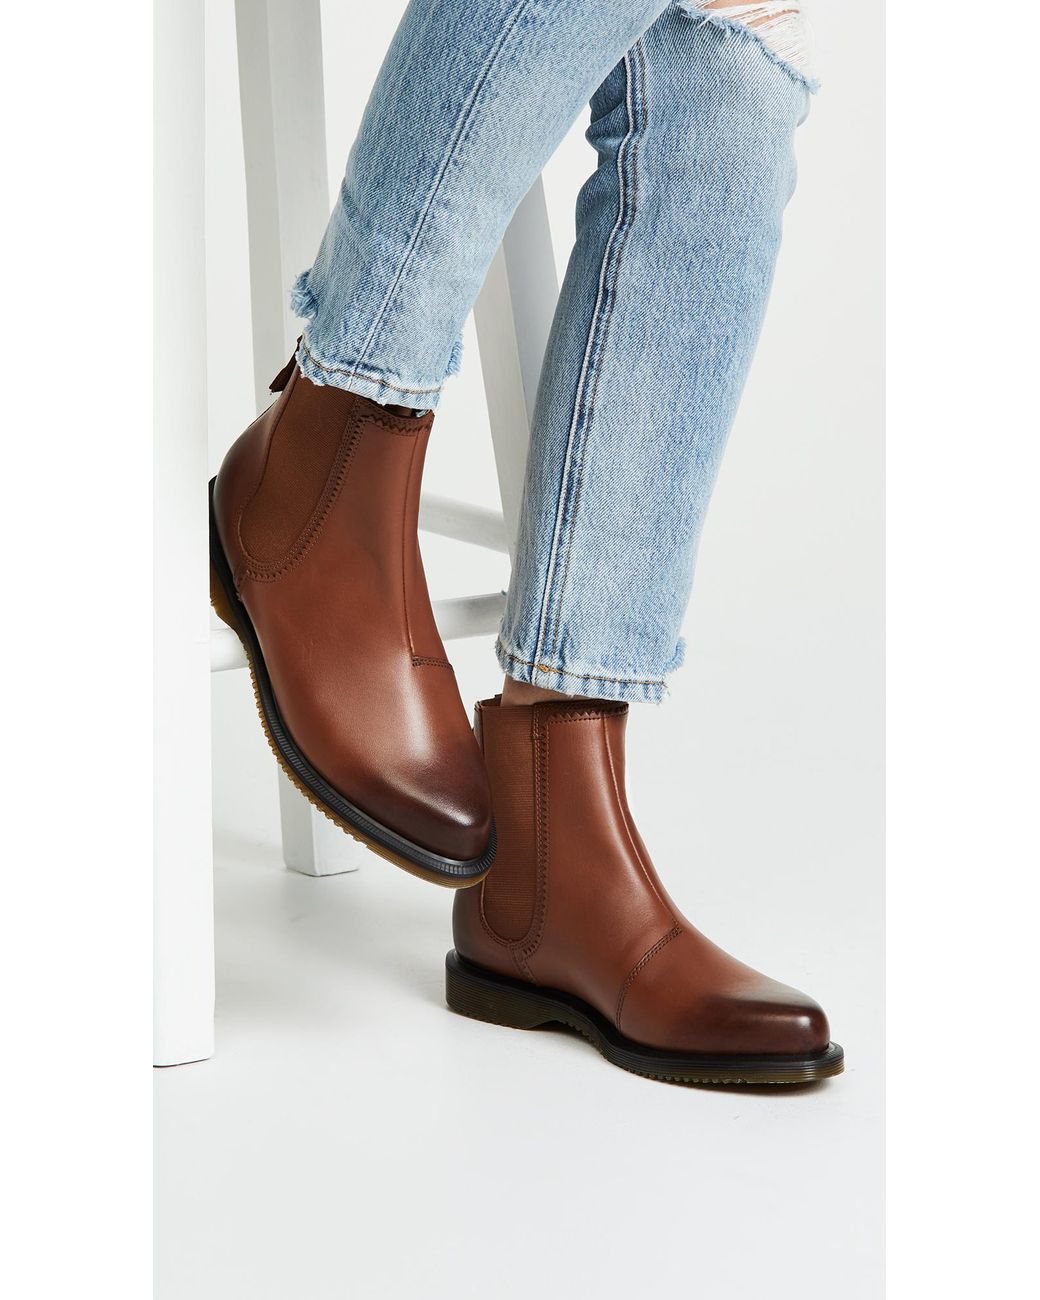 Dr. Martens Leather Zillow Temperley Chelsea Boots in Oak (Brown) | Lyst